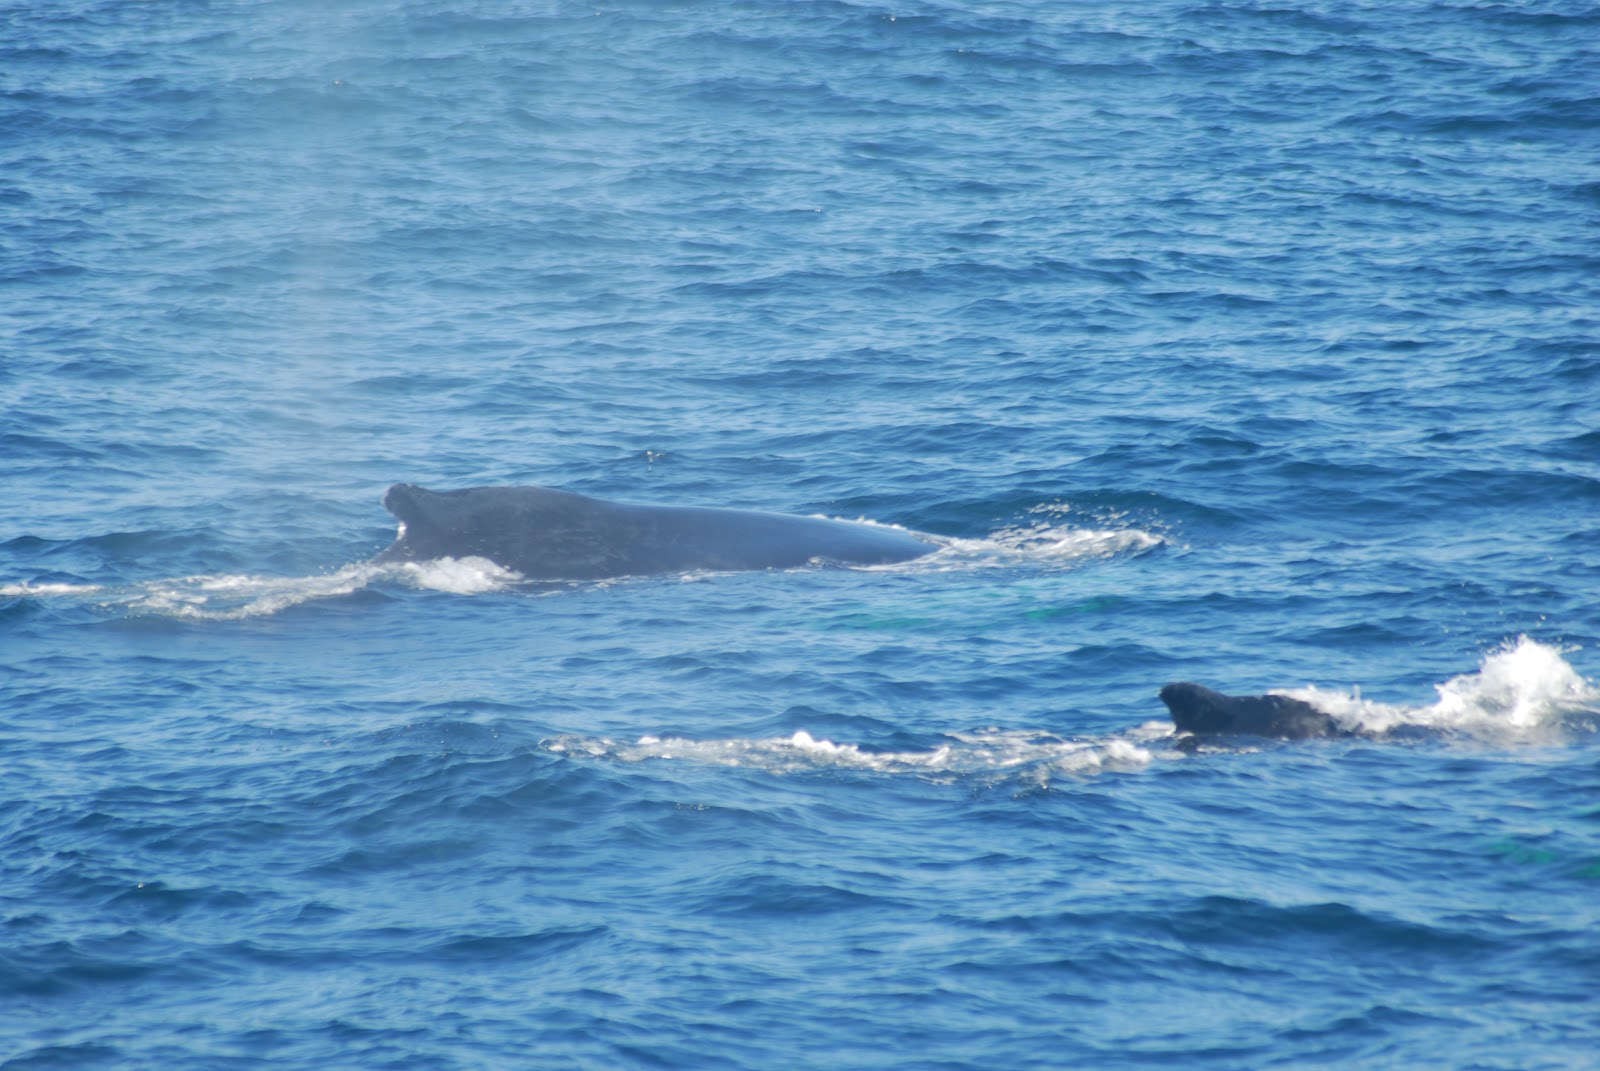 Blue Ocean Society's Whale Sightings: Price of Whales September3